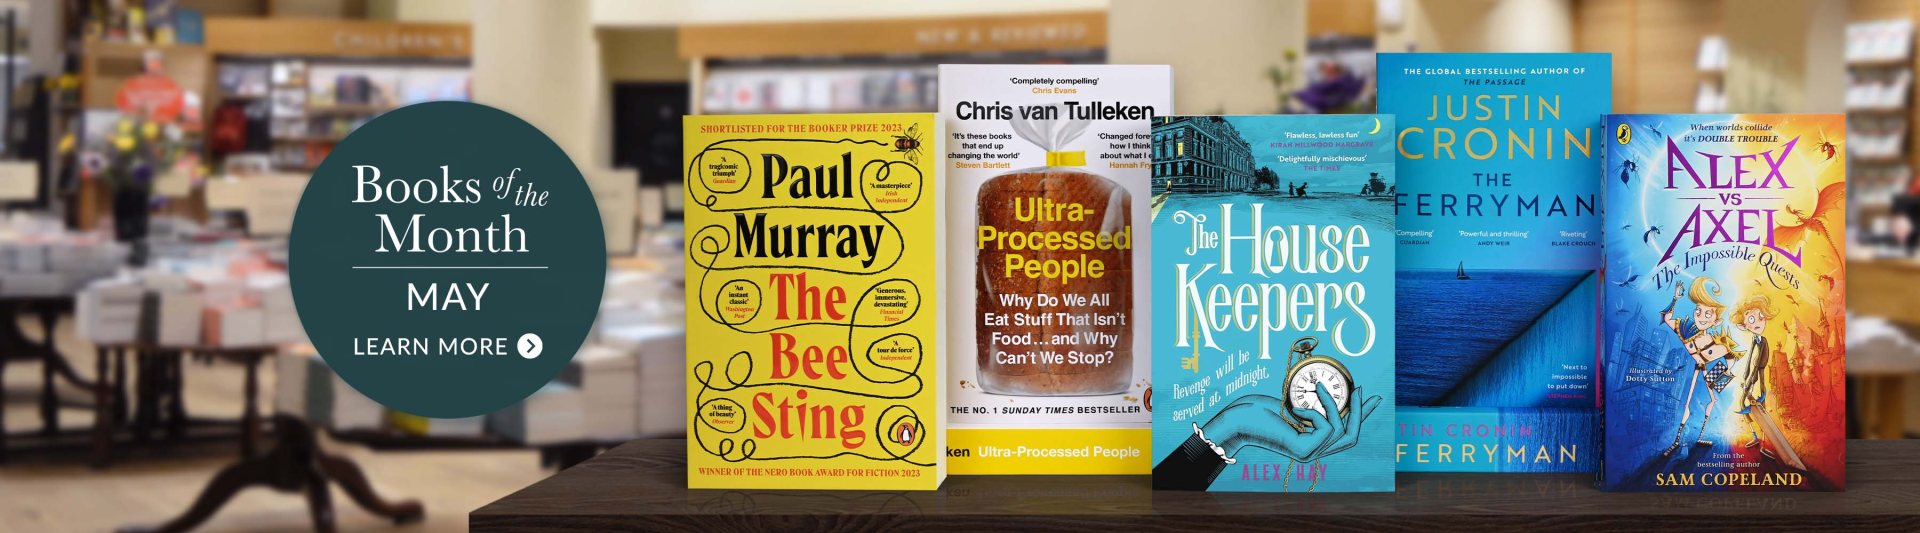 Books of the Month: May | FIND OUT MORE